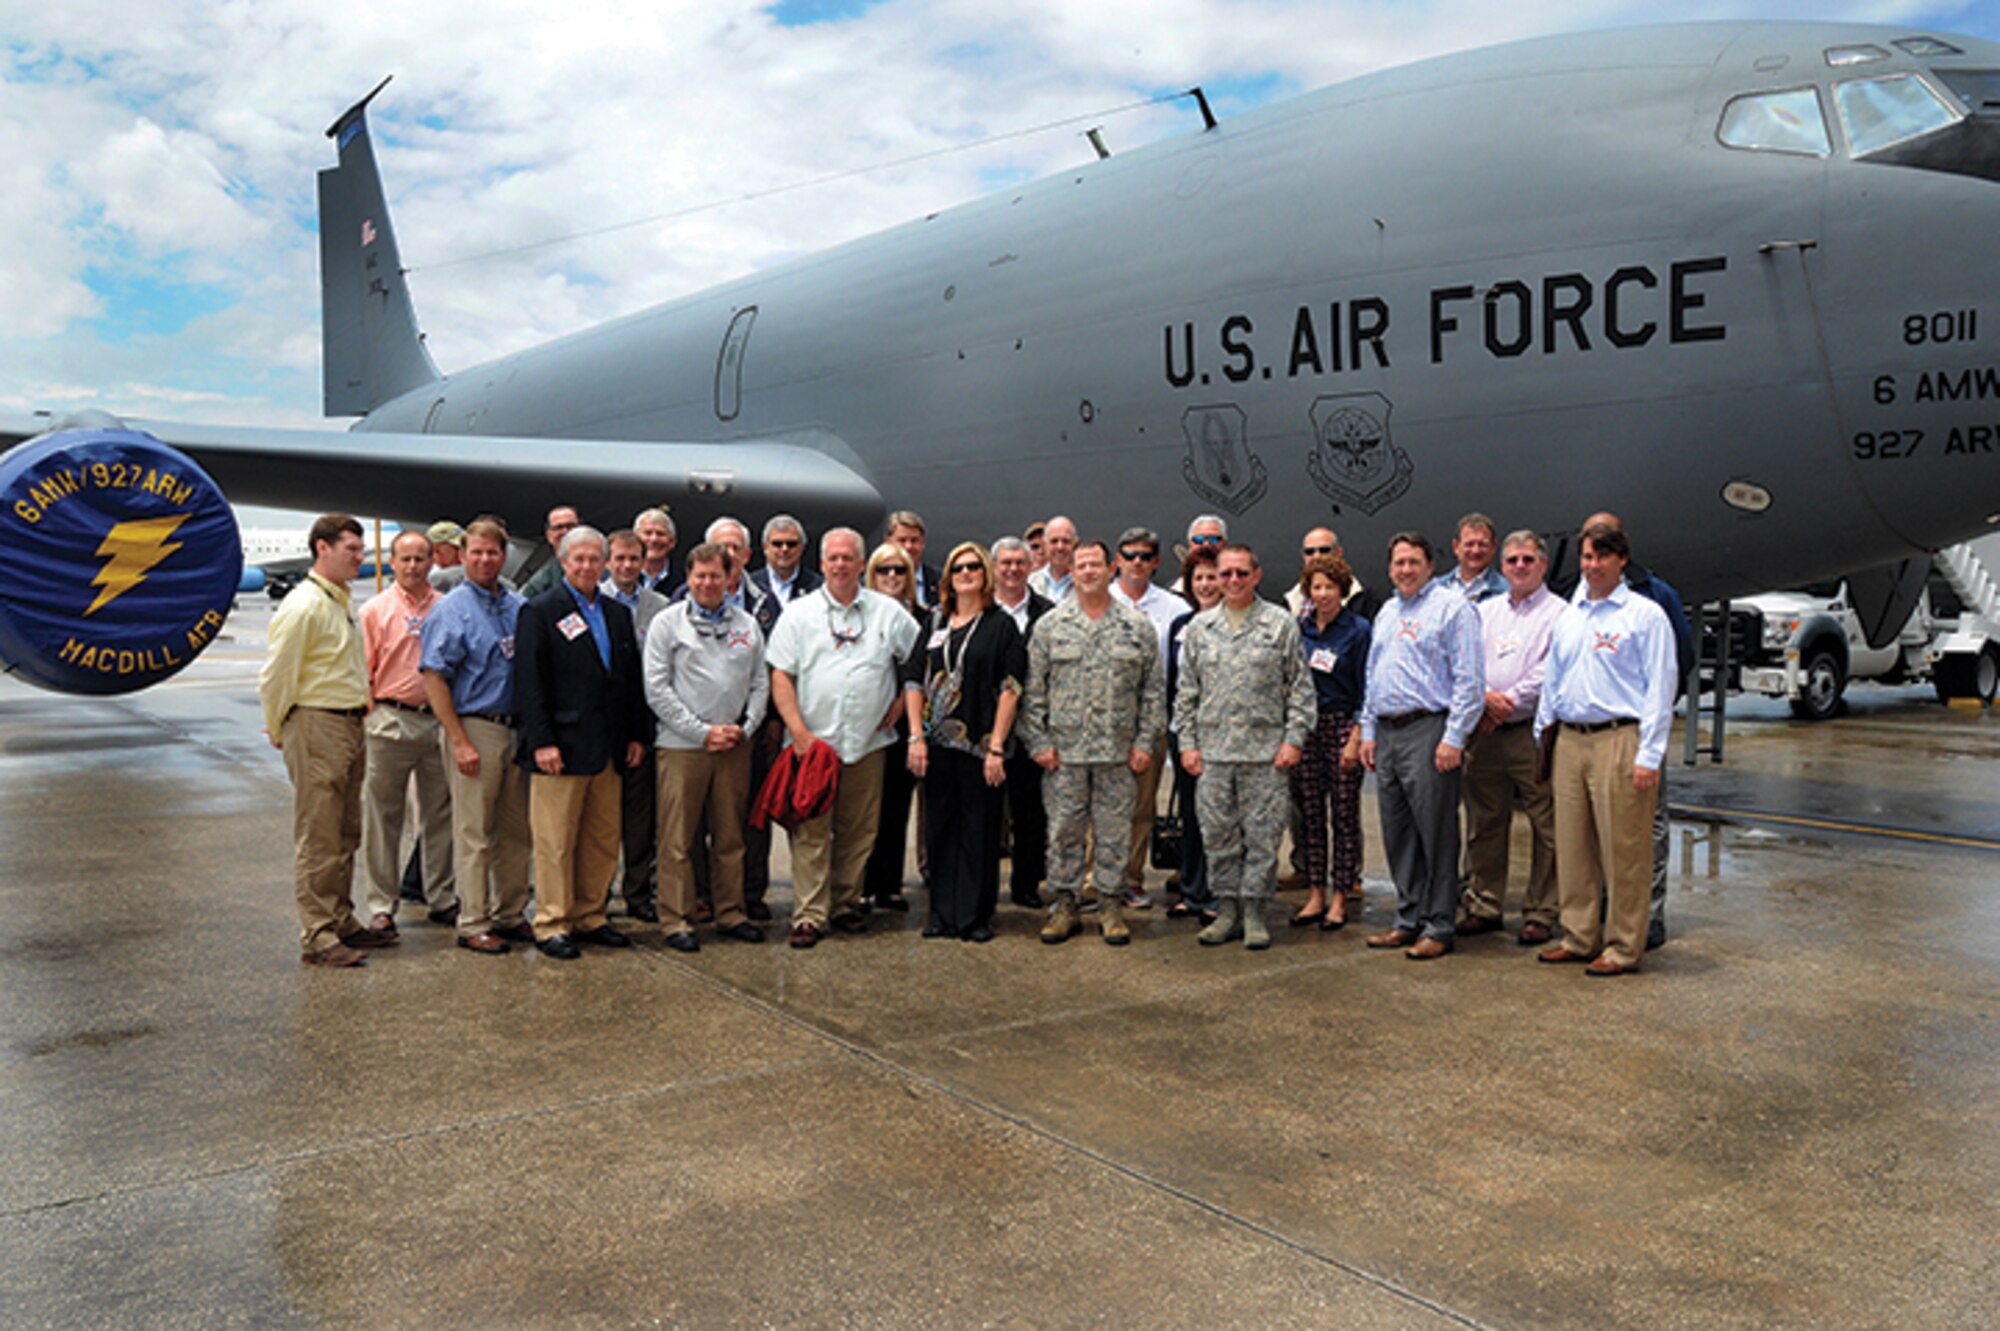 The 908th Airlift Wing recently hosted 29 local elected officials and business people on a Civic Leader Tour to MacDill Air Force Base, Fla. Here, the group poses in front of a KC-135 Stratotanker belonging to the 927th Air Refueling Wing.